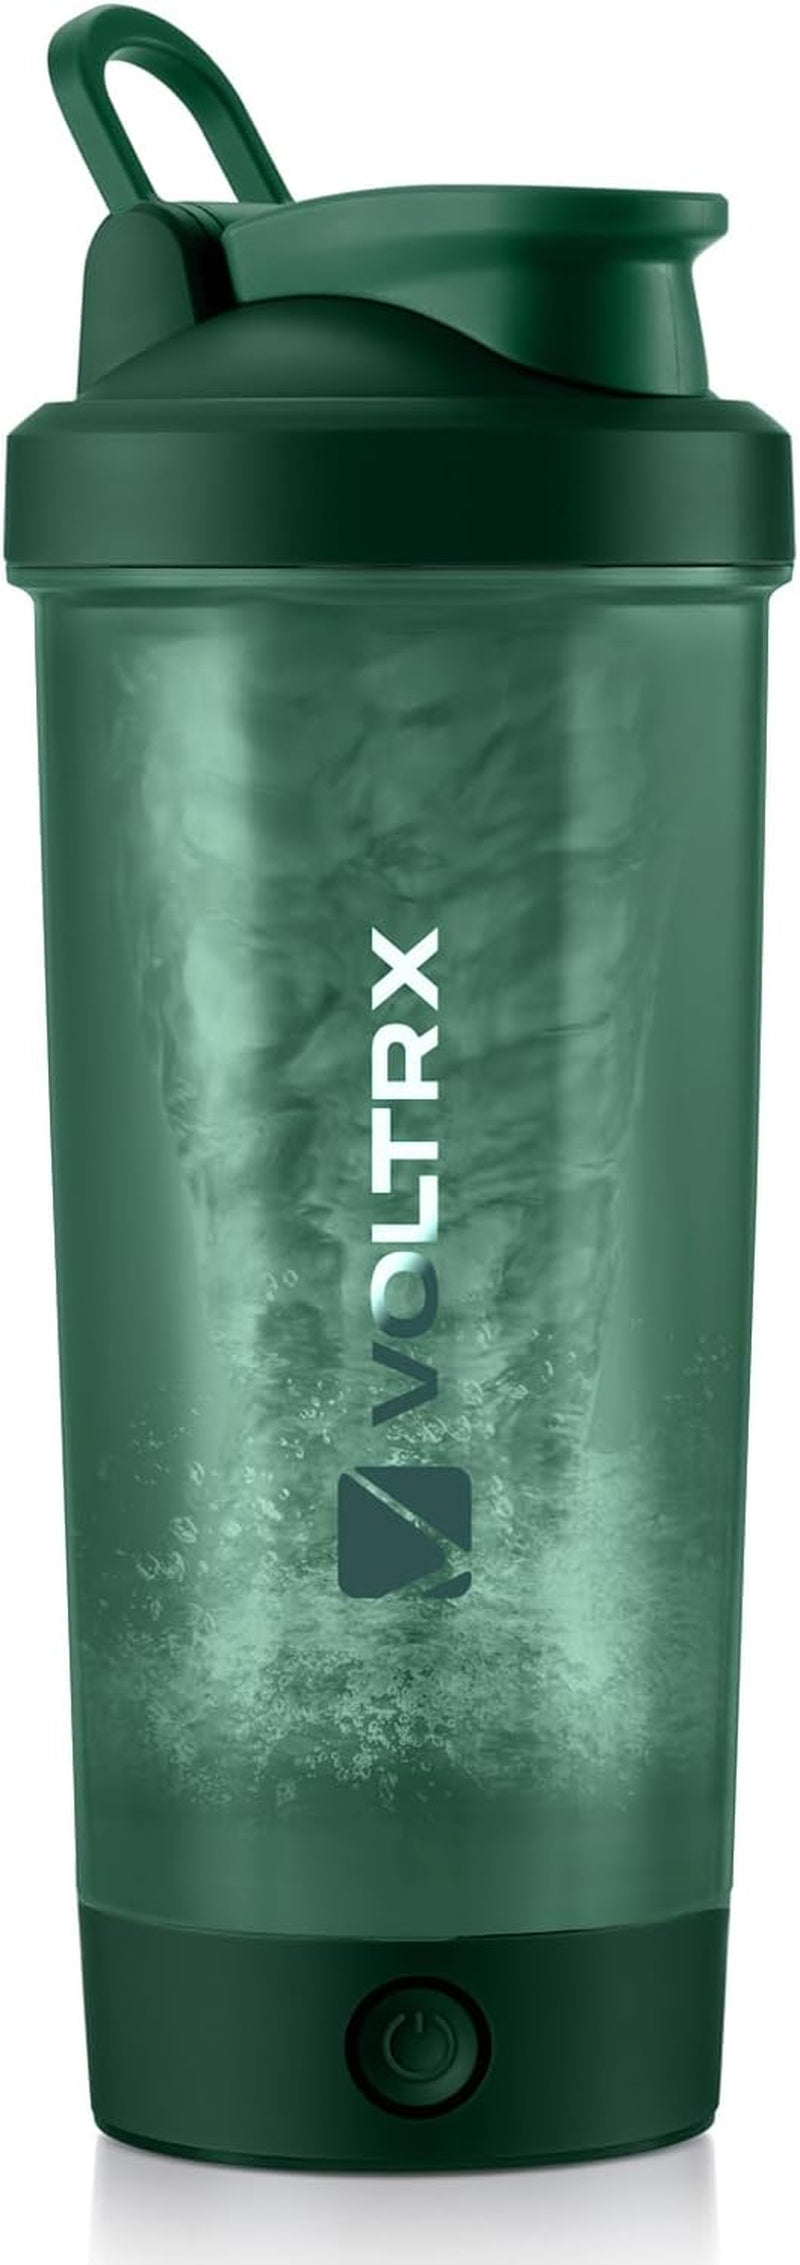 VOLTRX Protein Shaker Bottle, Merger USB C Rechargeable Electric Protein Shake Mixer, Shaker Cups for Protein Shakes and Meal Replacement Shakes, BPA Free, 24oz